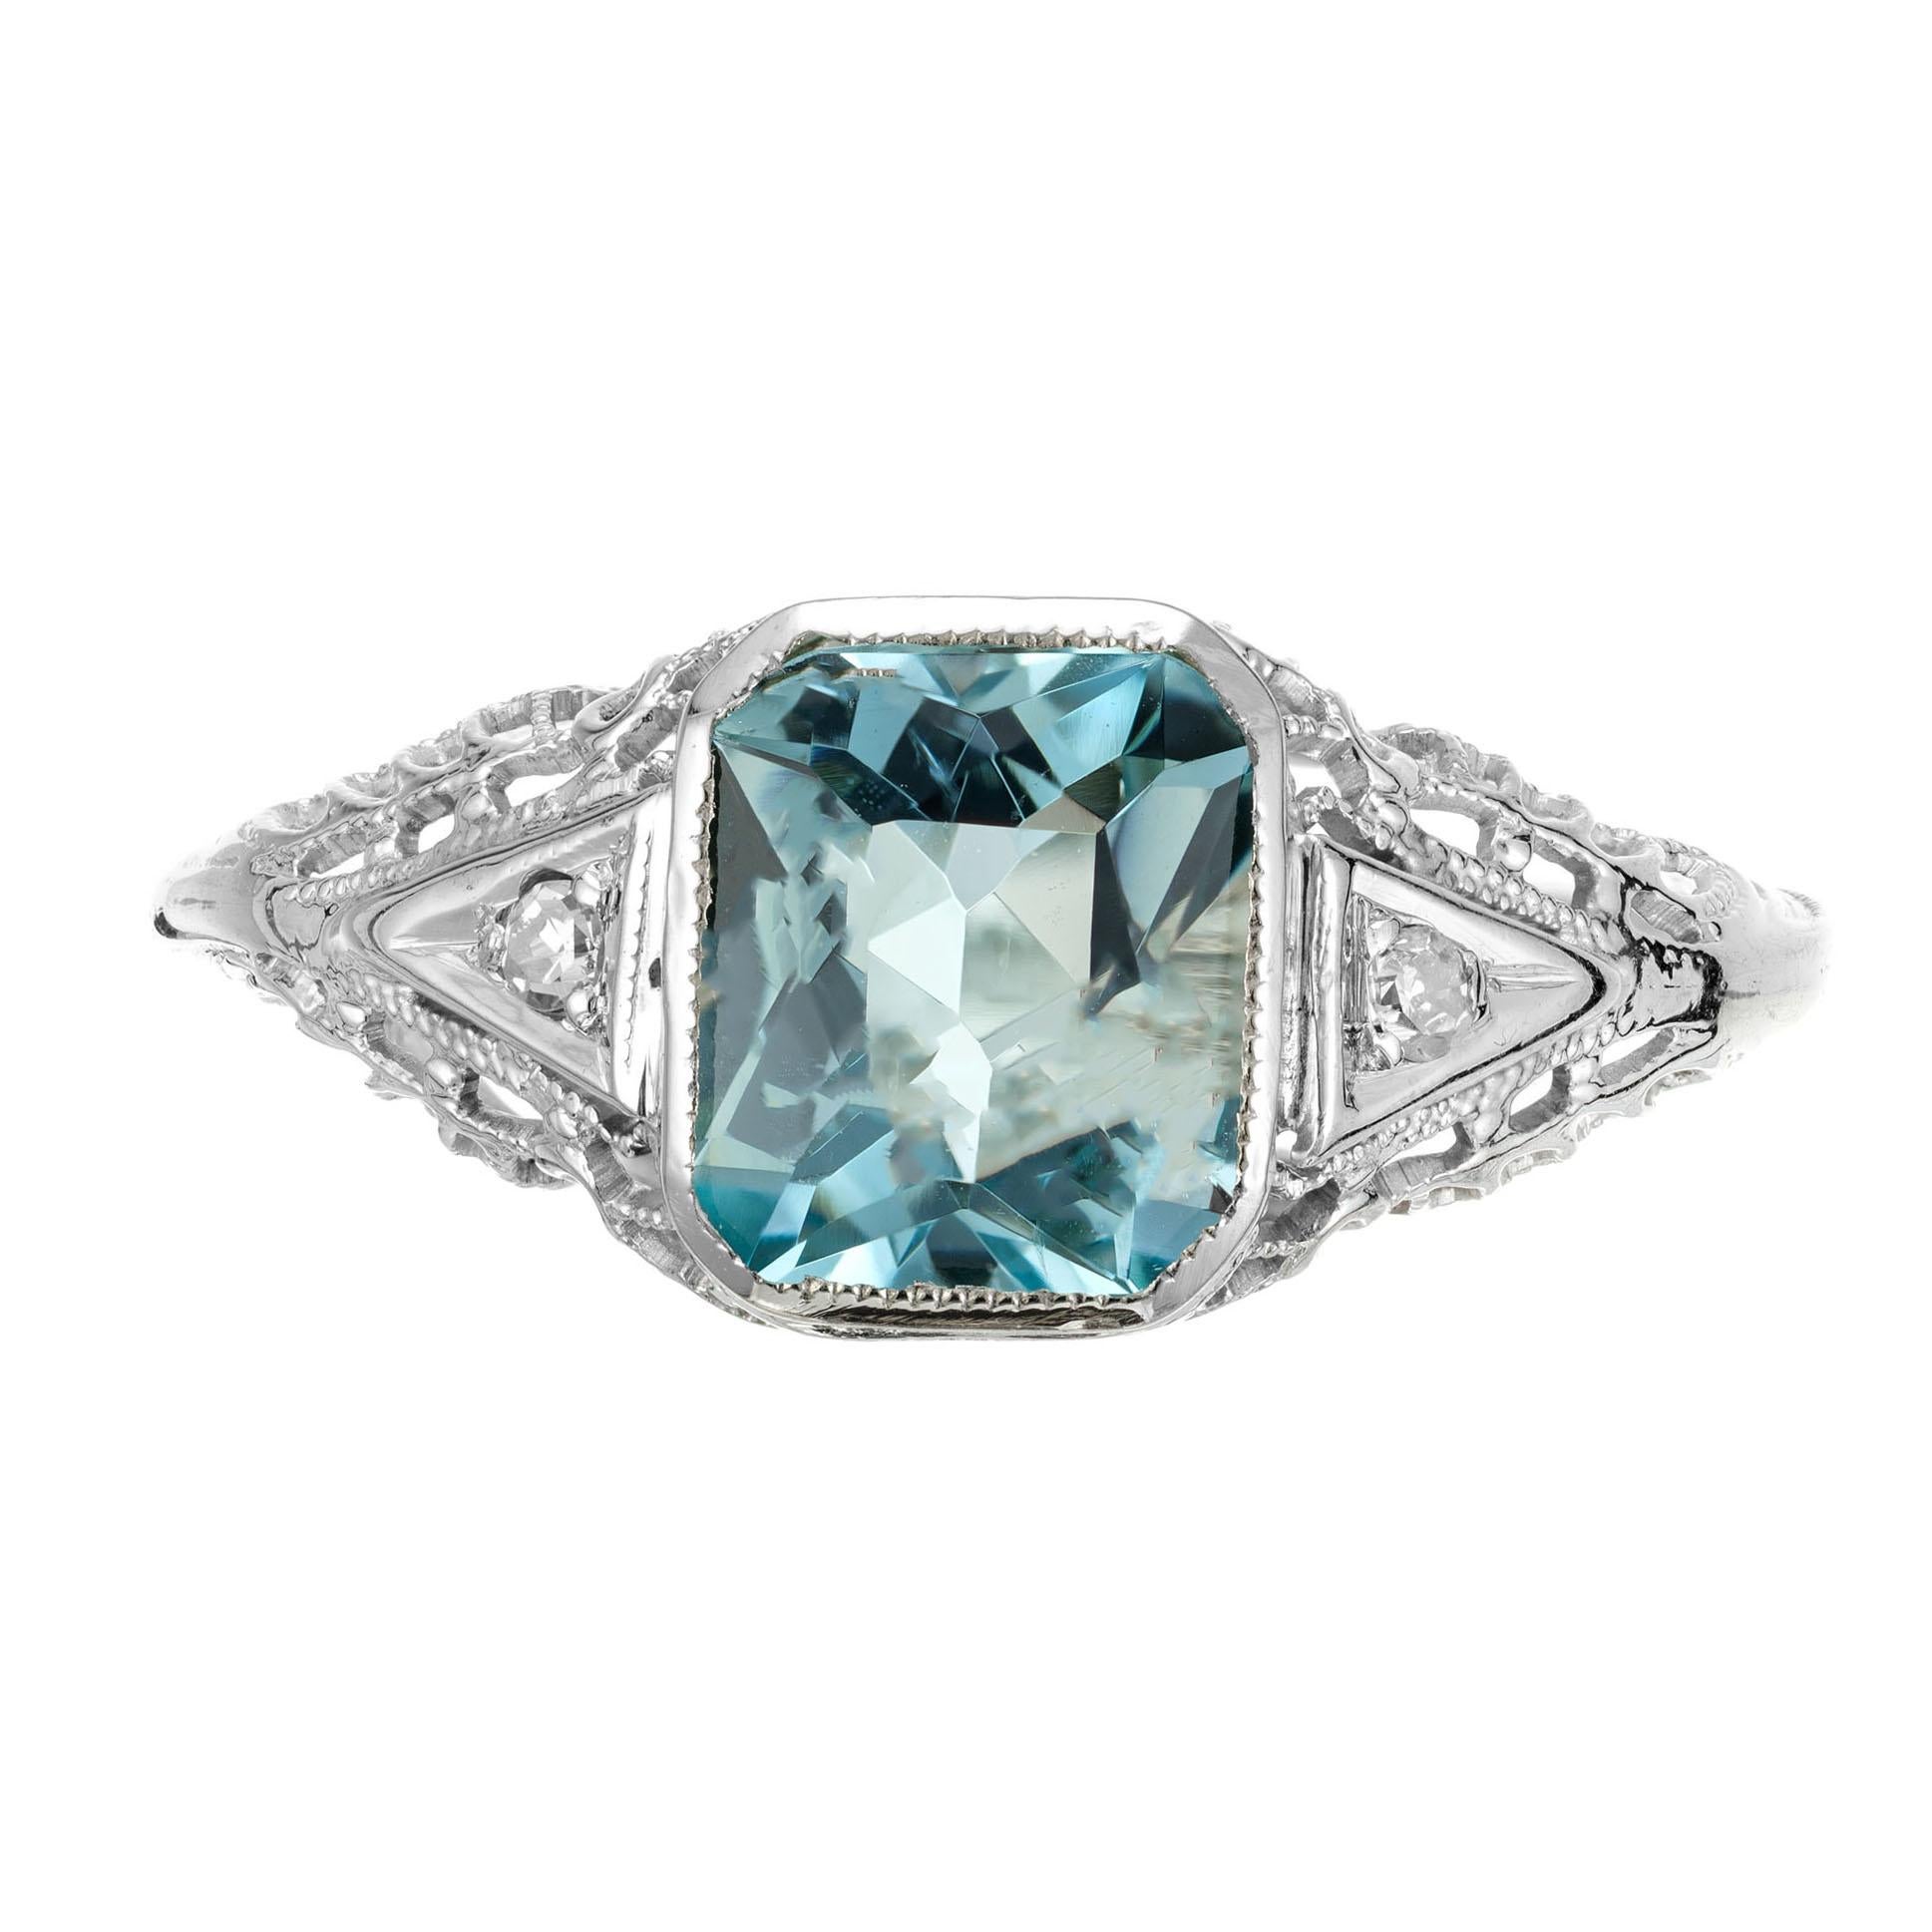 Aquamarine and diamond Art Deco filigree engagement ring. Natural no heat aqua center stone, set in a 14k white gold setting with 2 single cut accent diamonds. Circa 1930's.

1 Natural no heat untreated Aqua, approx. total weight 1.58cts, 8 x